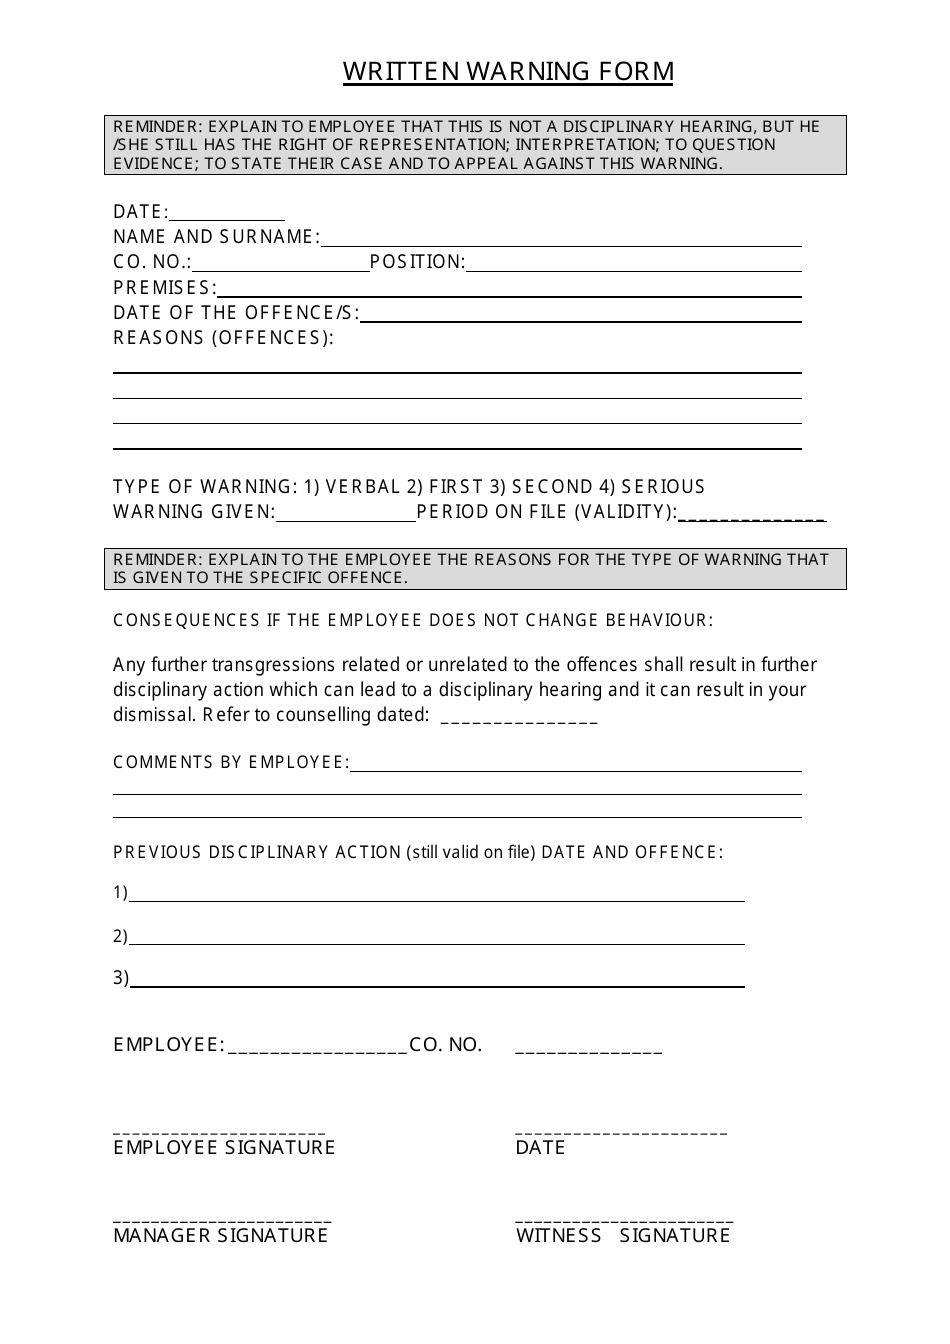 Written Warning Form Fill Out, Sign Online and Download PDF